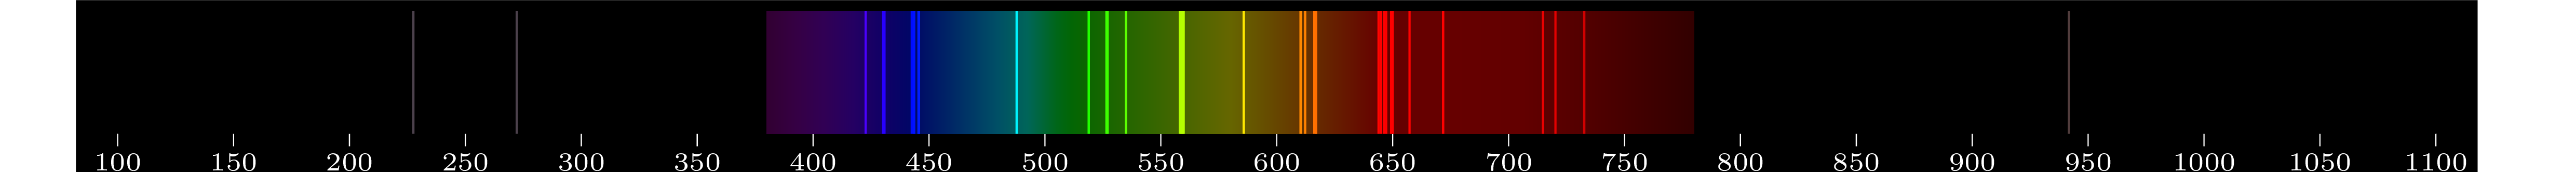 emmision spectra of element Ca